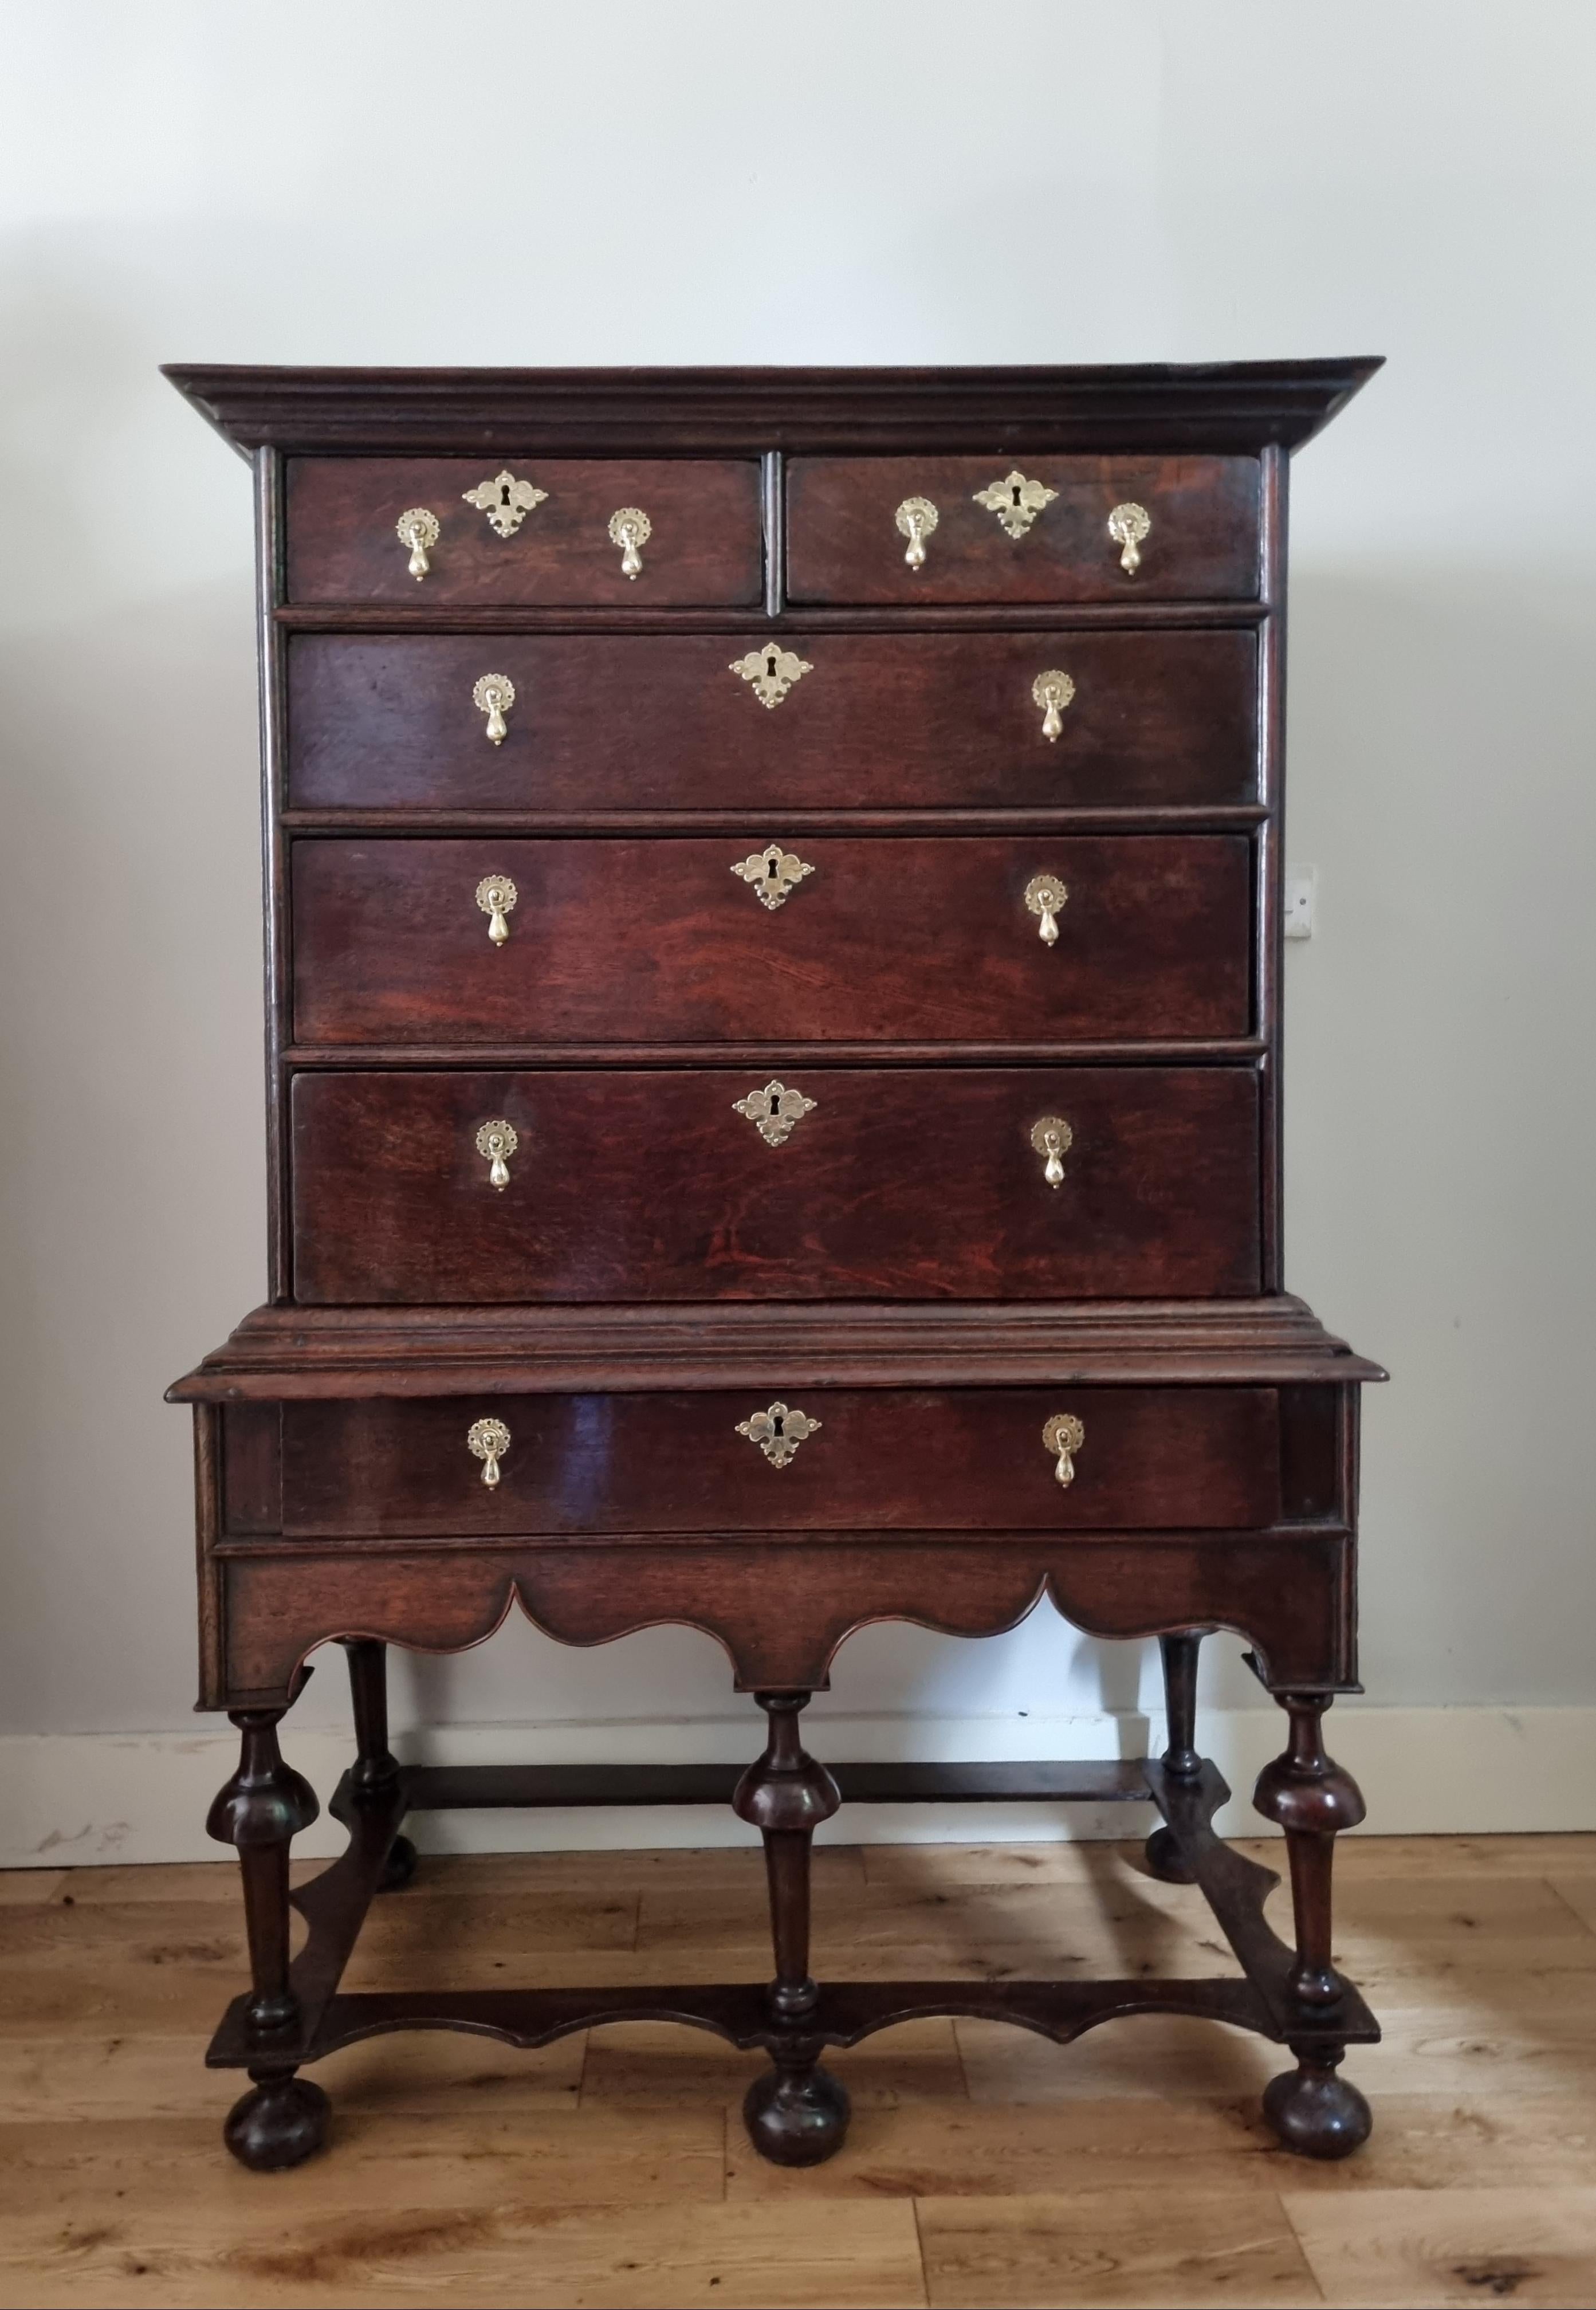 An extremely rare English William & Mary Oak Chest on stand, dating back to circa 1690, beautifully proportioned, fantastic colour and deep patination . featuring two short drawers and three long drawers, with a single long drawer positioned above